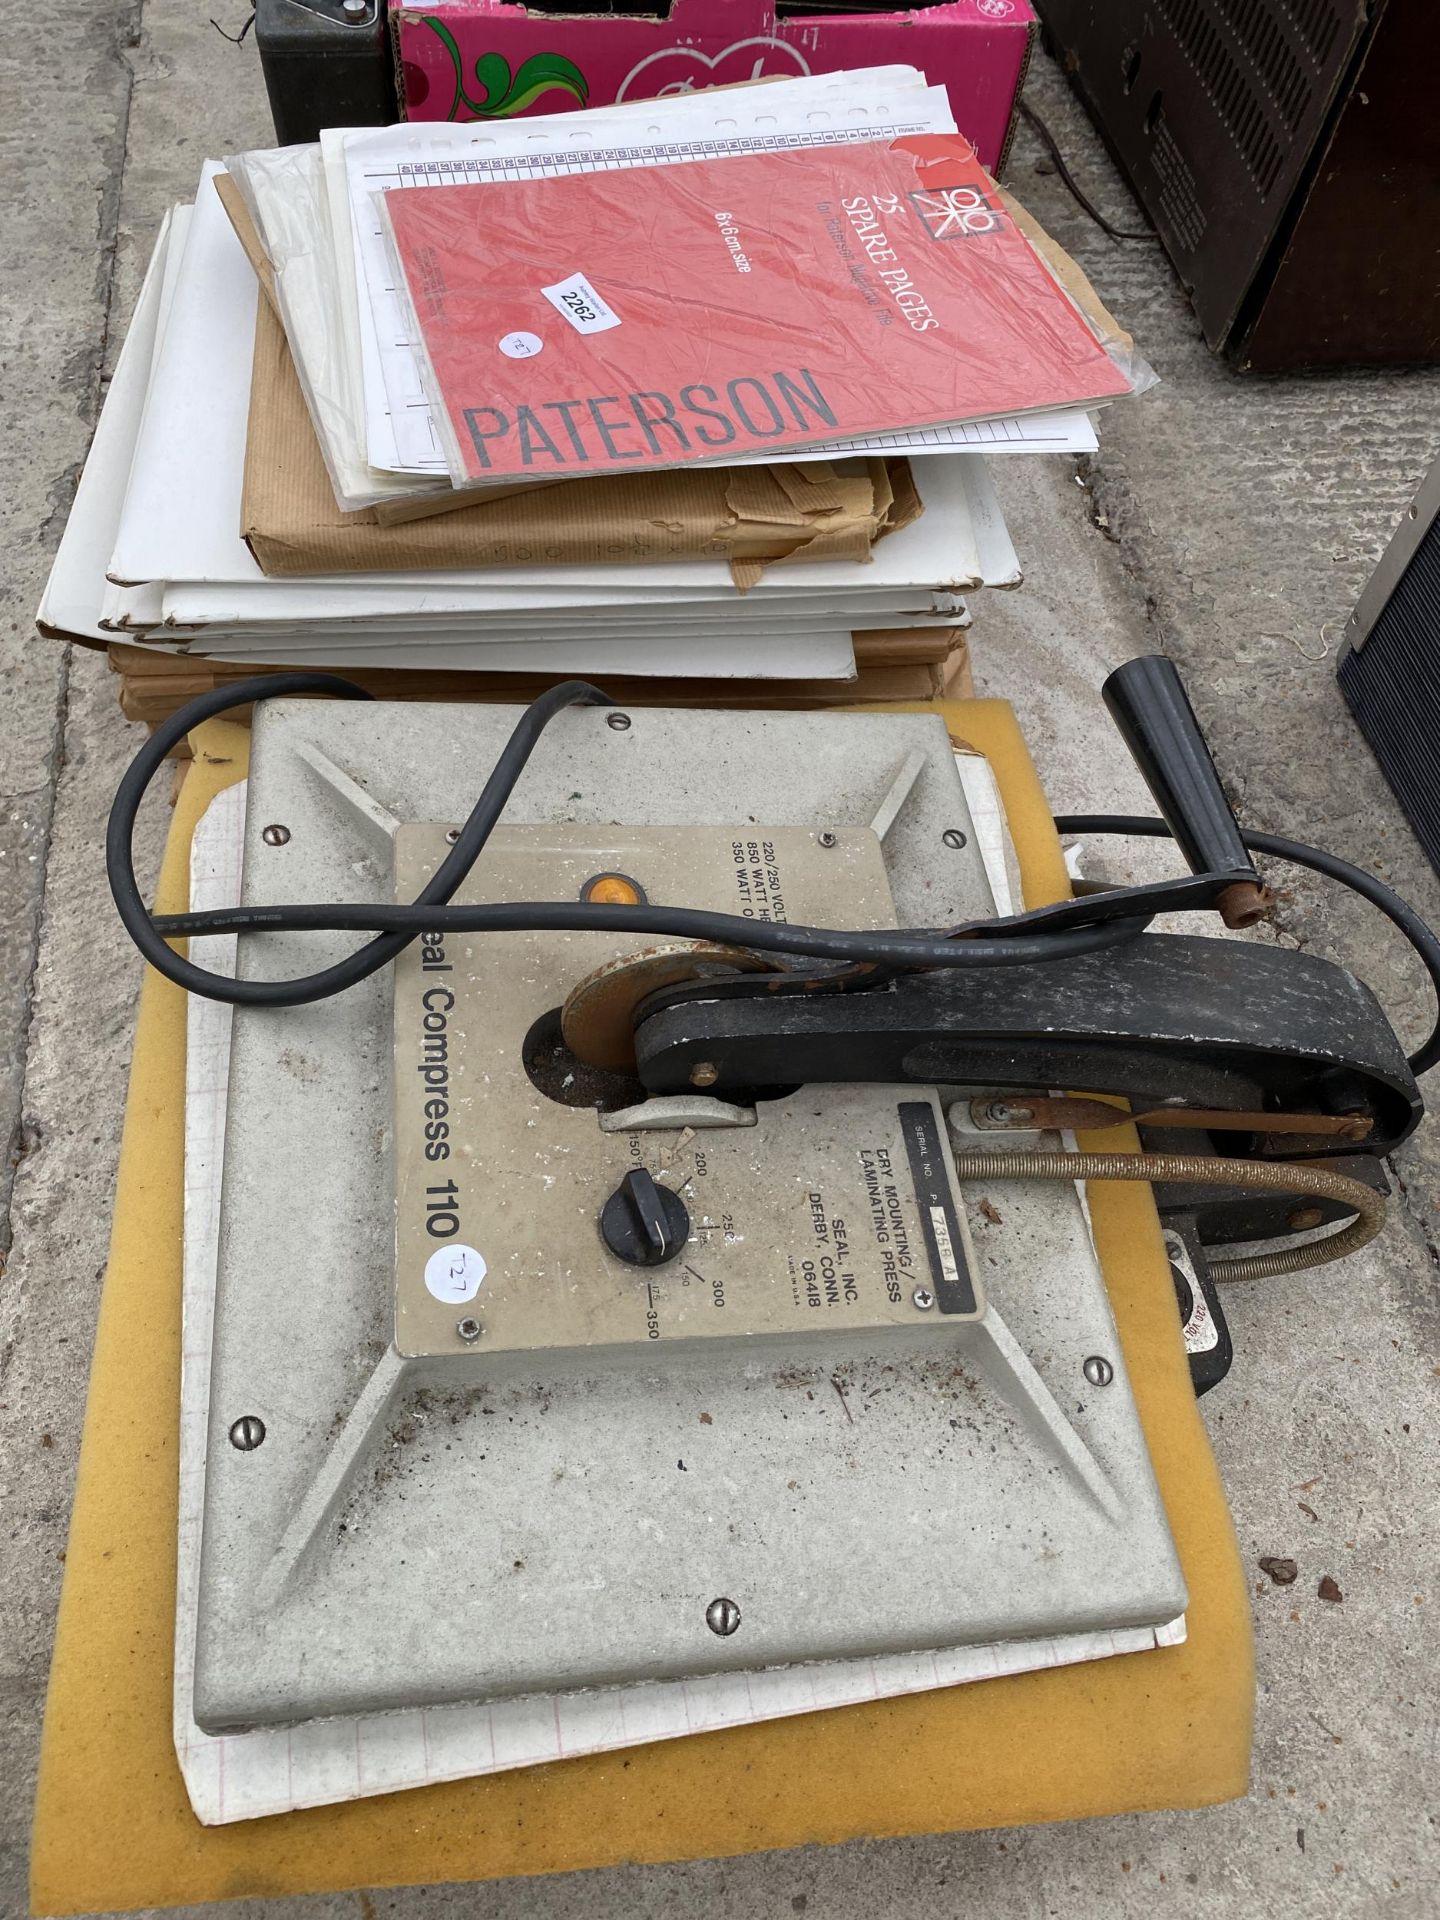 A SEAL COMPRESS 110 PRINTING PRESS AND AN ASSORTMENT OF PRINTING PAPER - Image 2 of 3